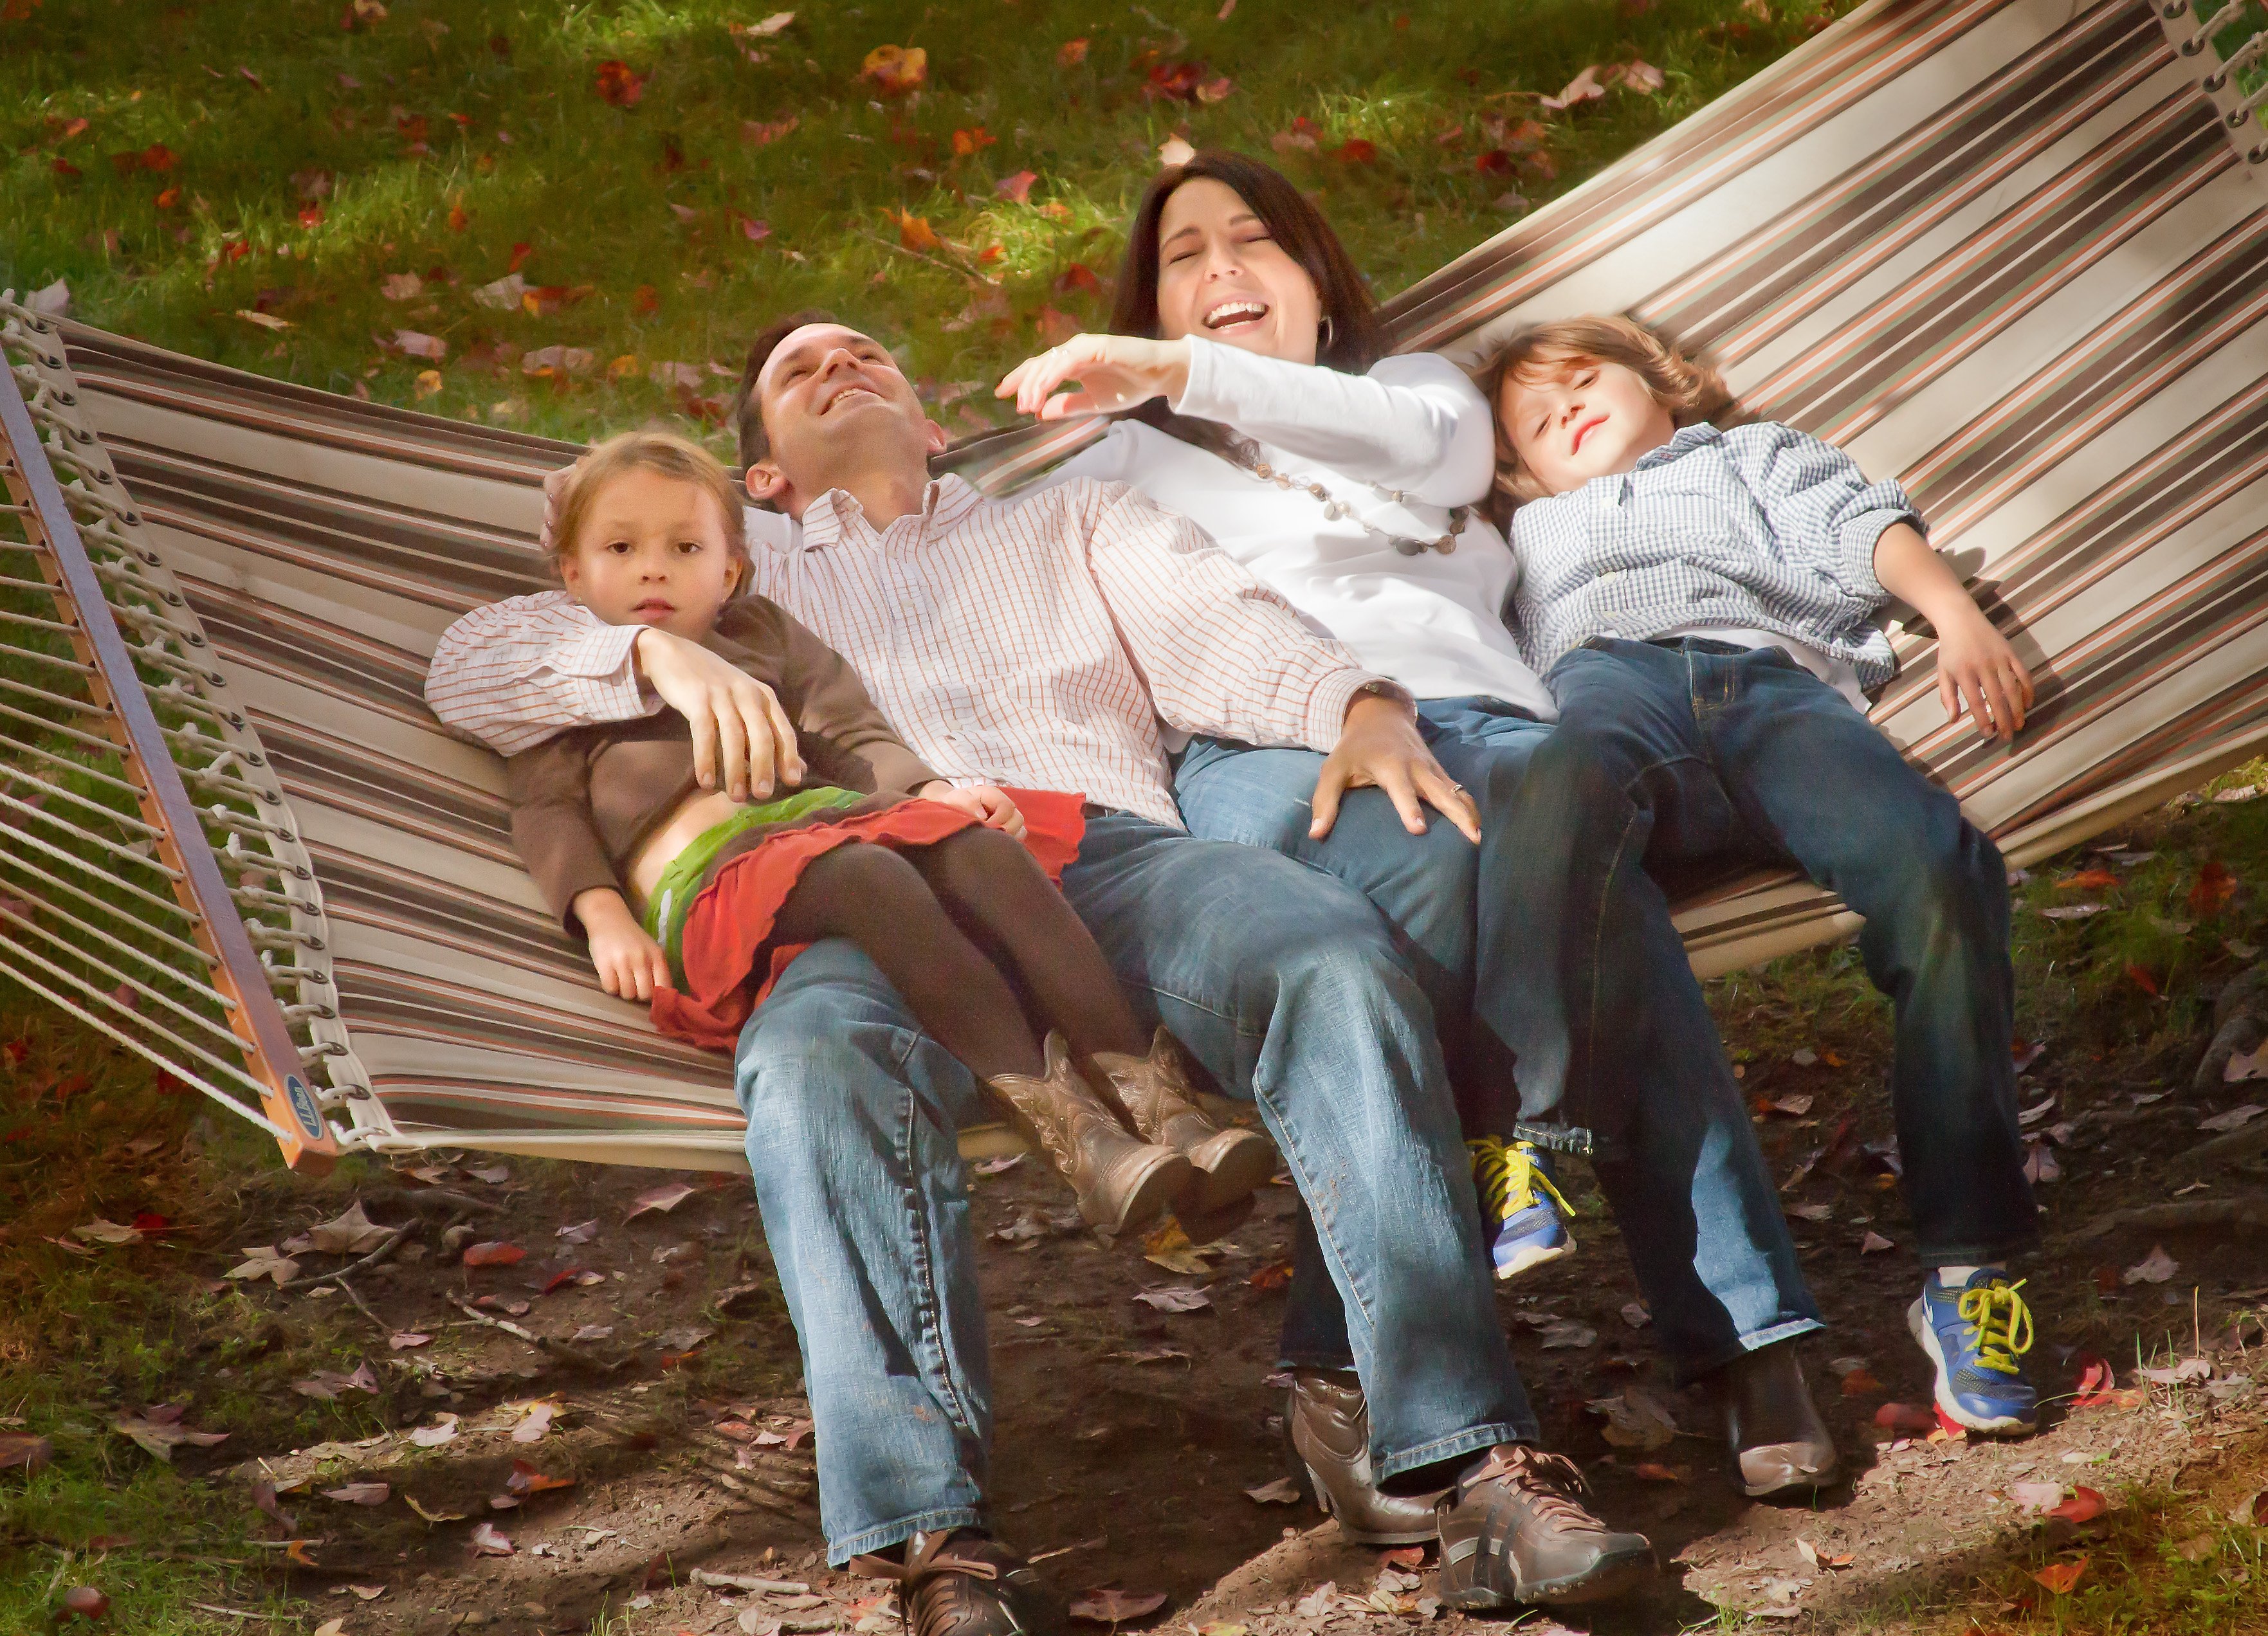 Family of four tries to fit in a hammock laughing